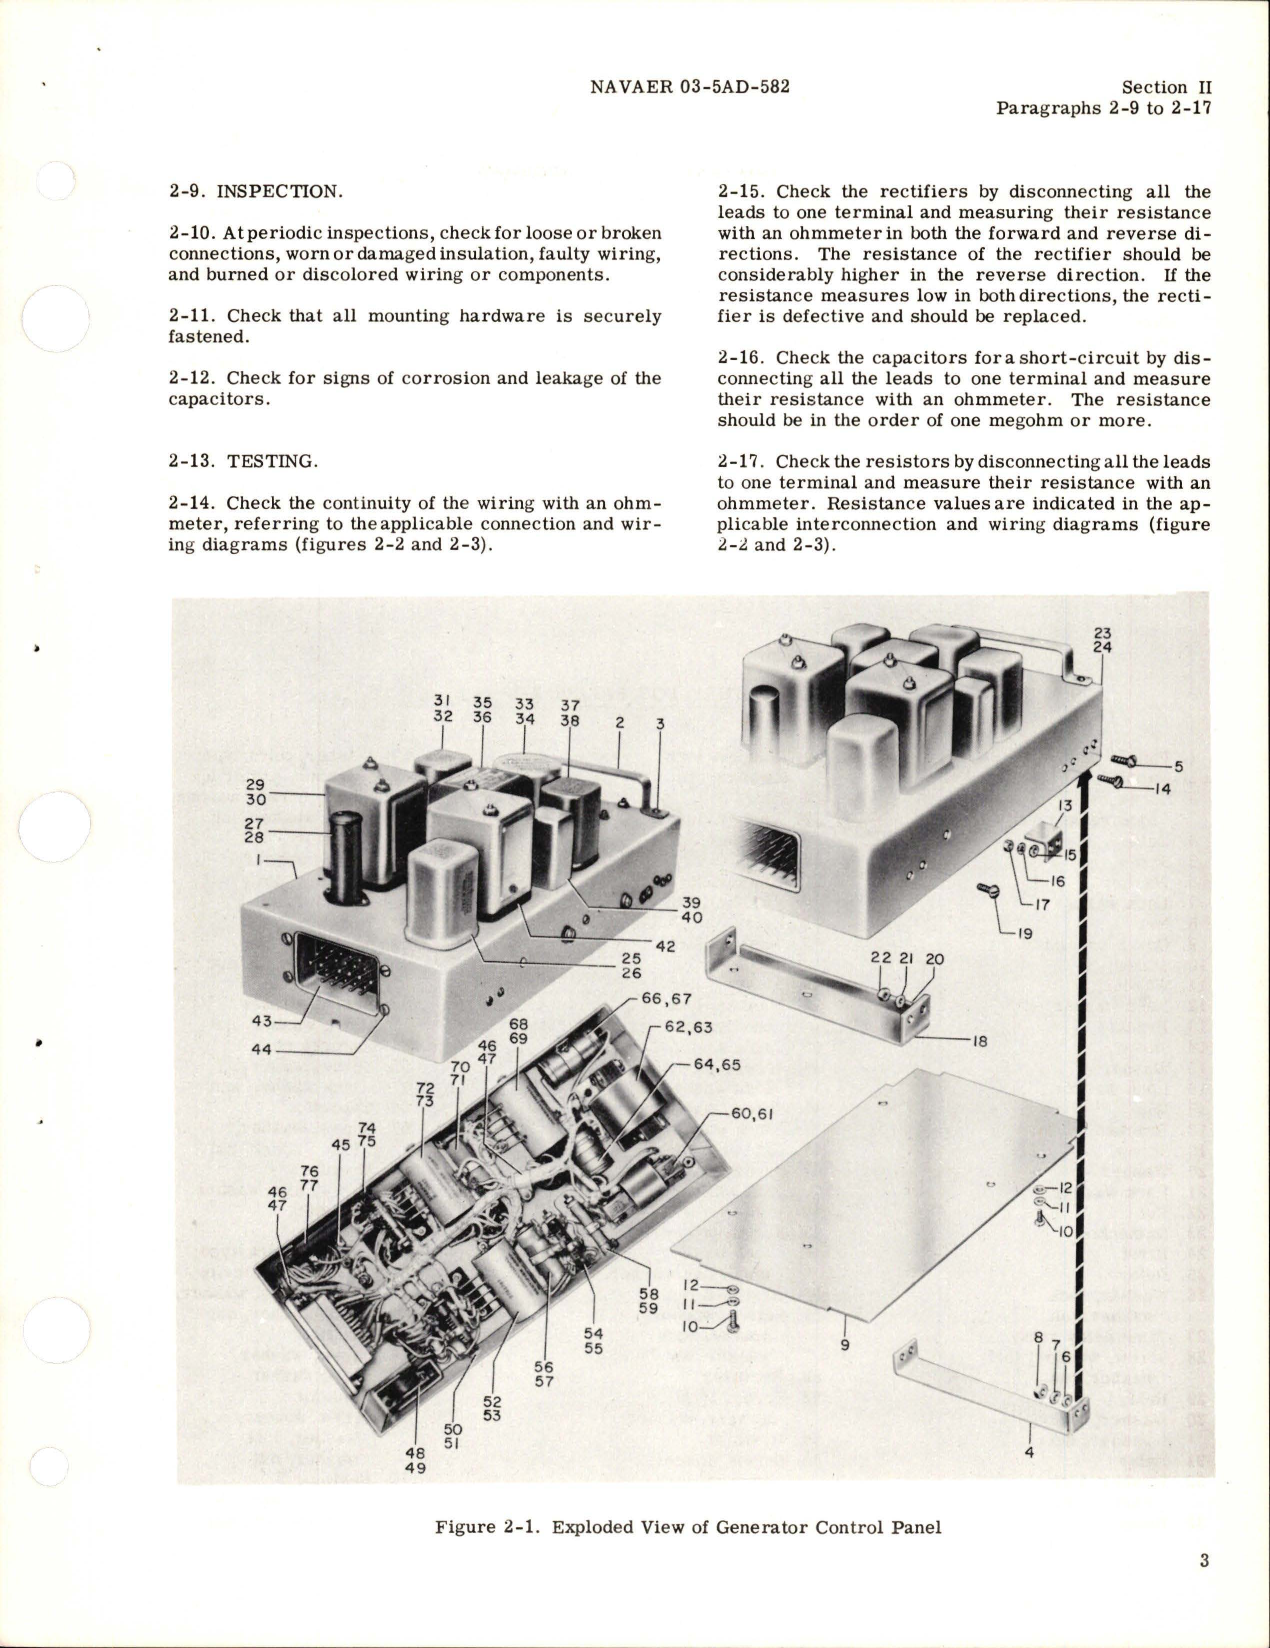 Sample page 7 from AirCorps Library document: Overhaul Instructions for AC Generator Control Panel - Models CR2781F103A2 and CR2781F103B1 